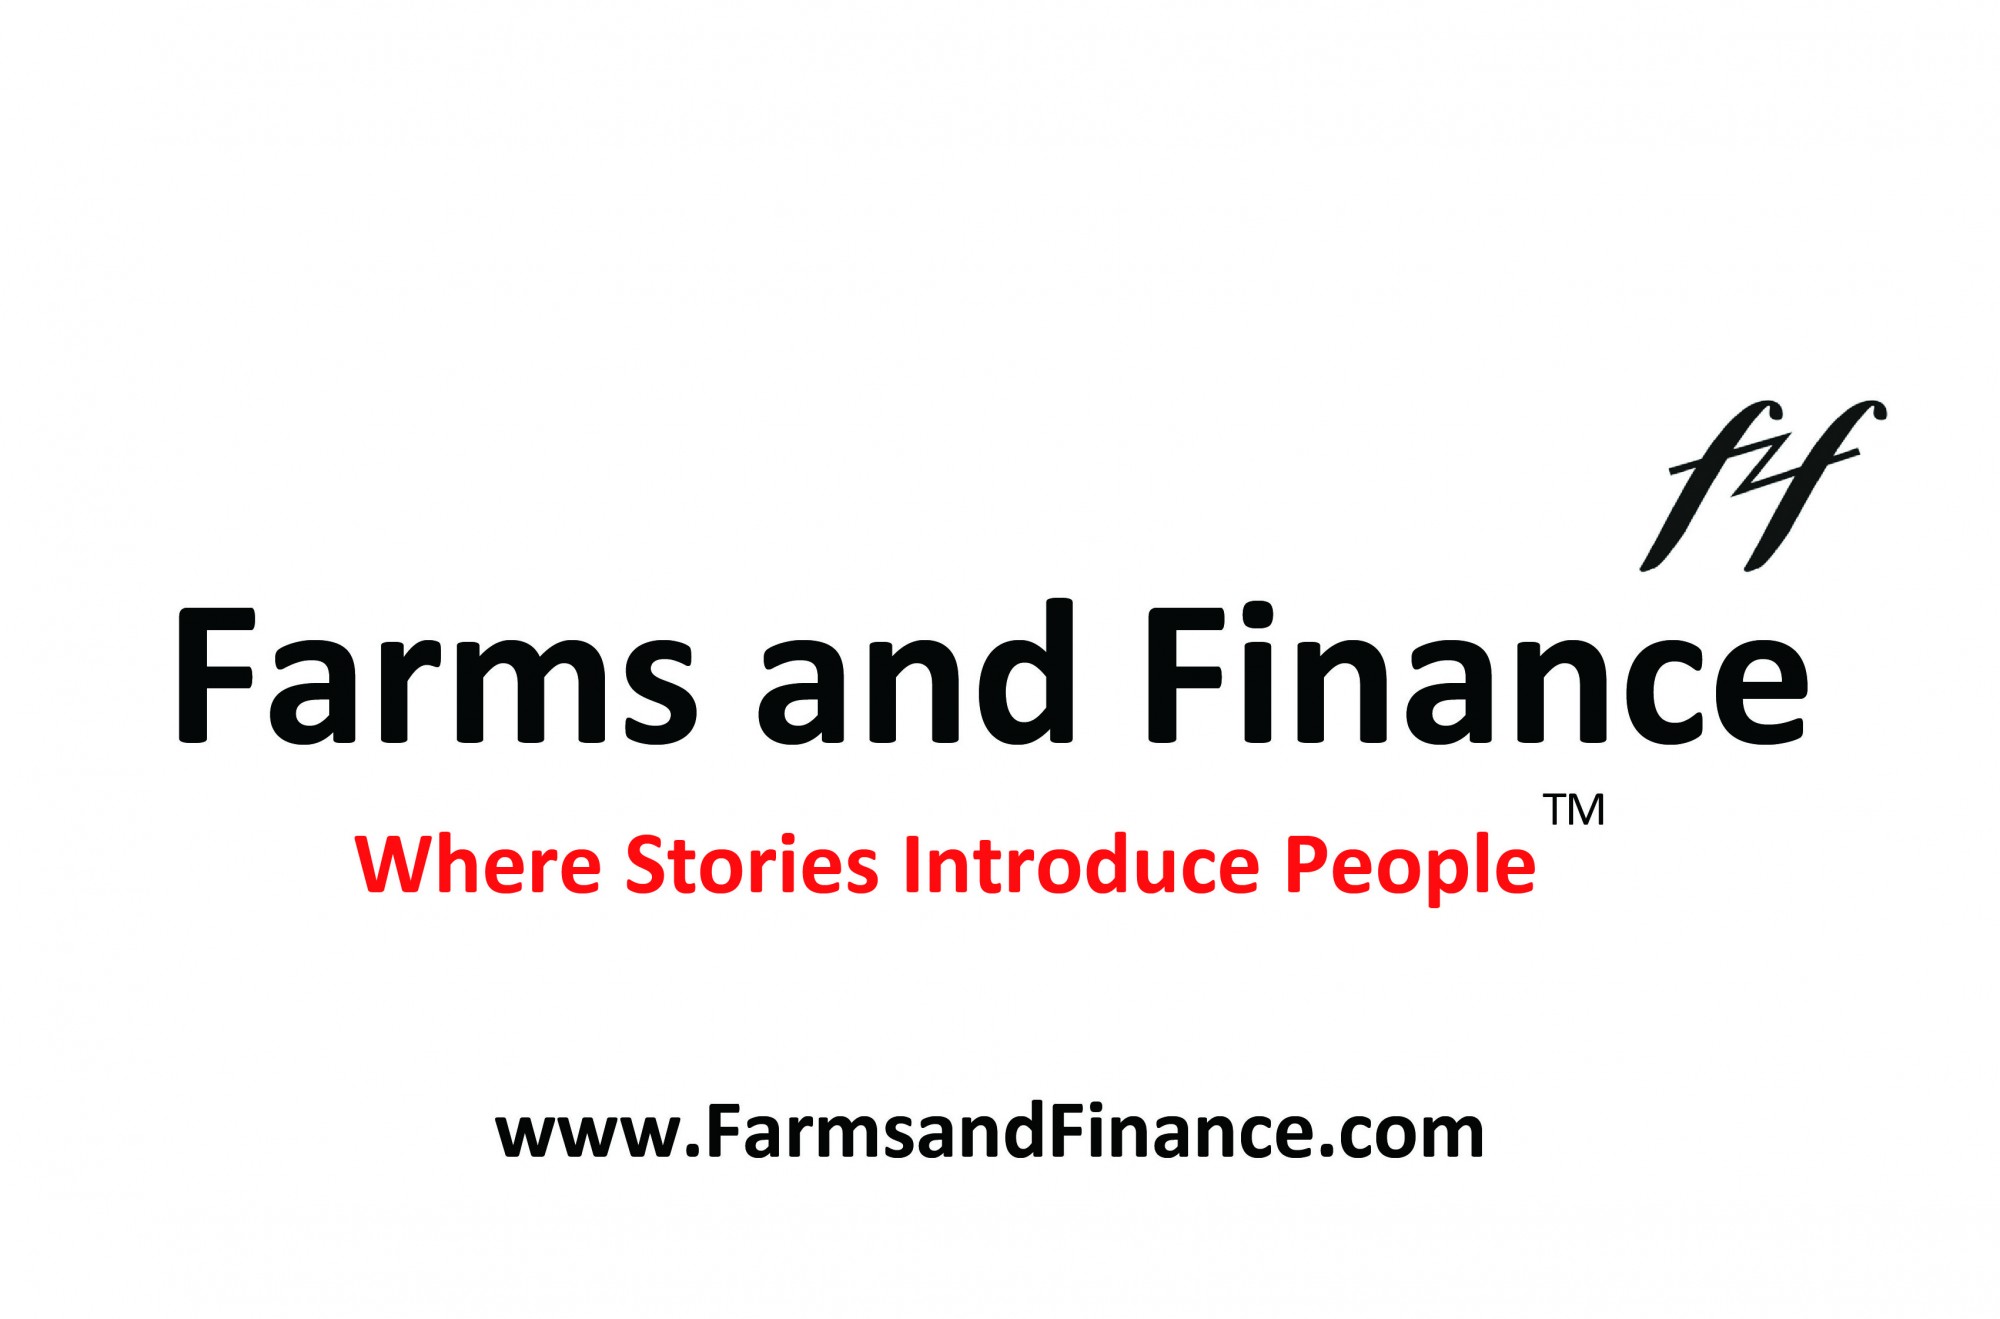 Farms and Finance